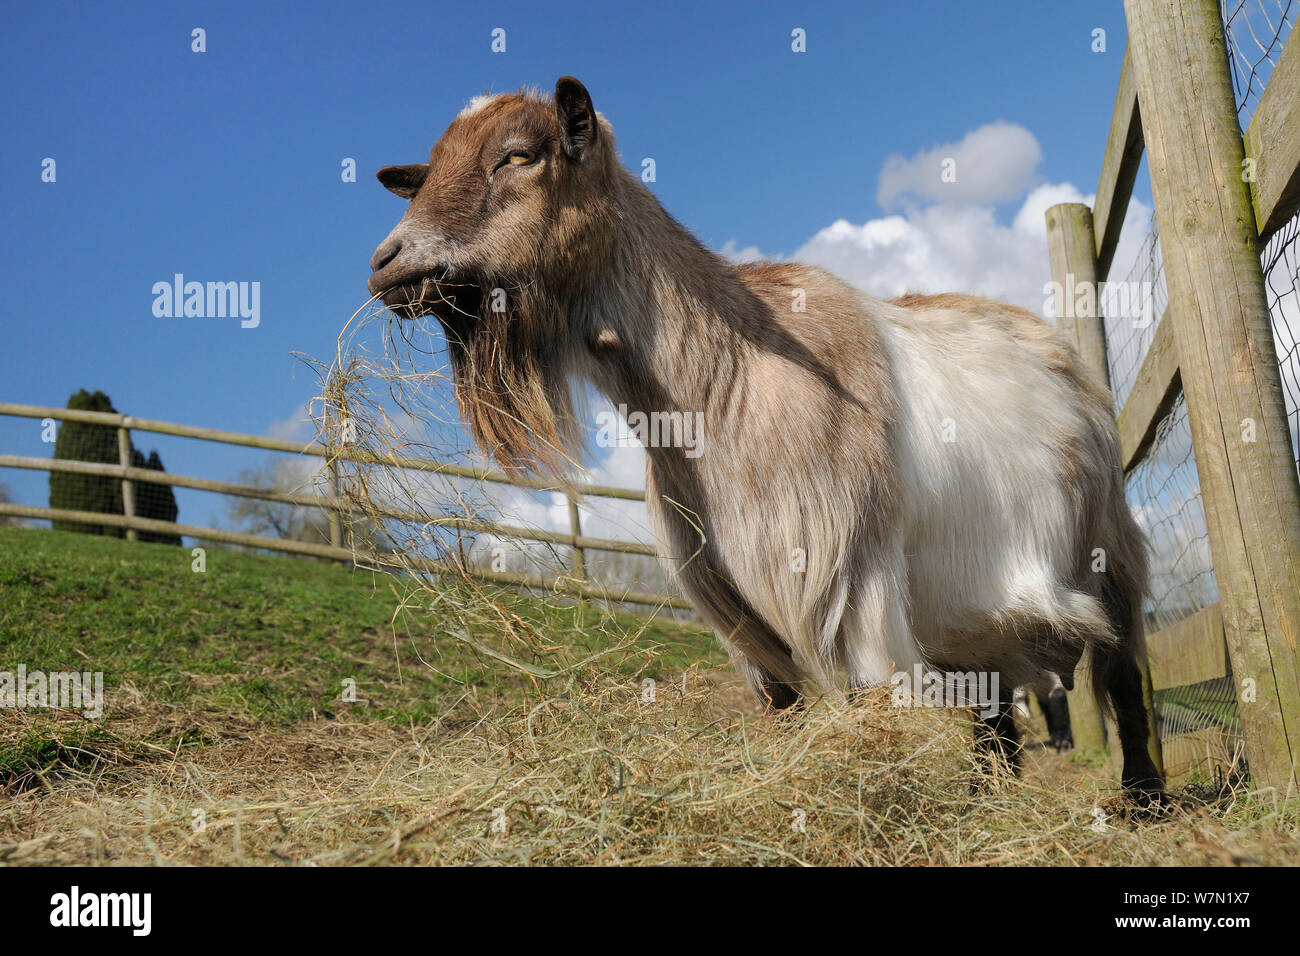 Pygmy goat (Capra hircus) with large beard grazing hay in fenced paddock, Wiltshire, UK, March. Stock Photo